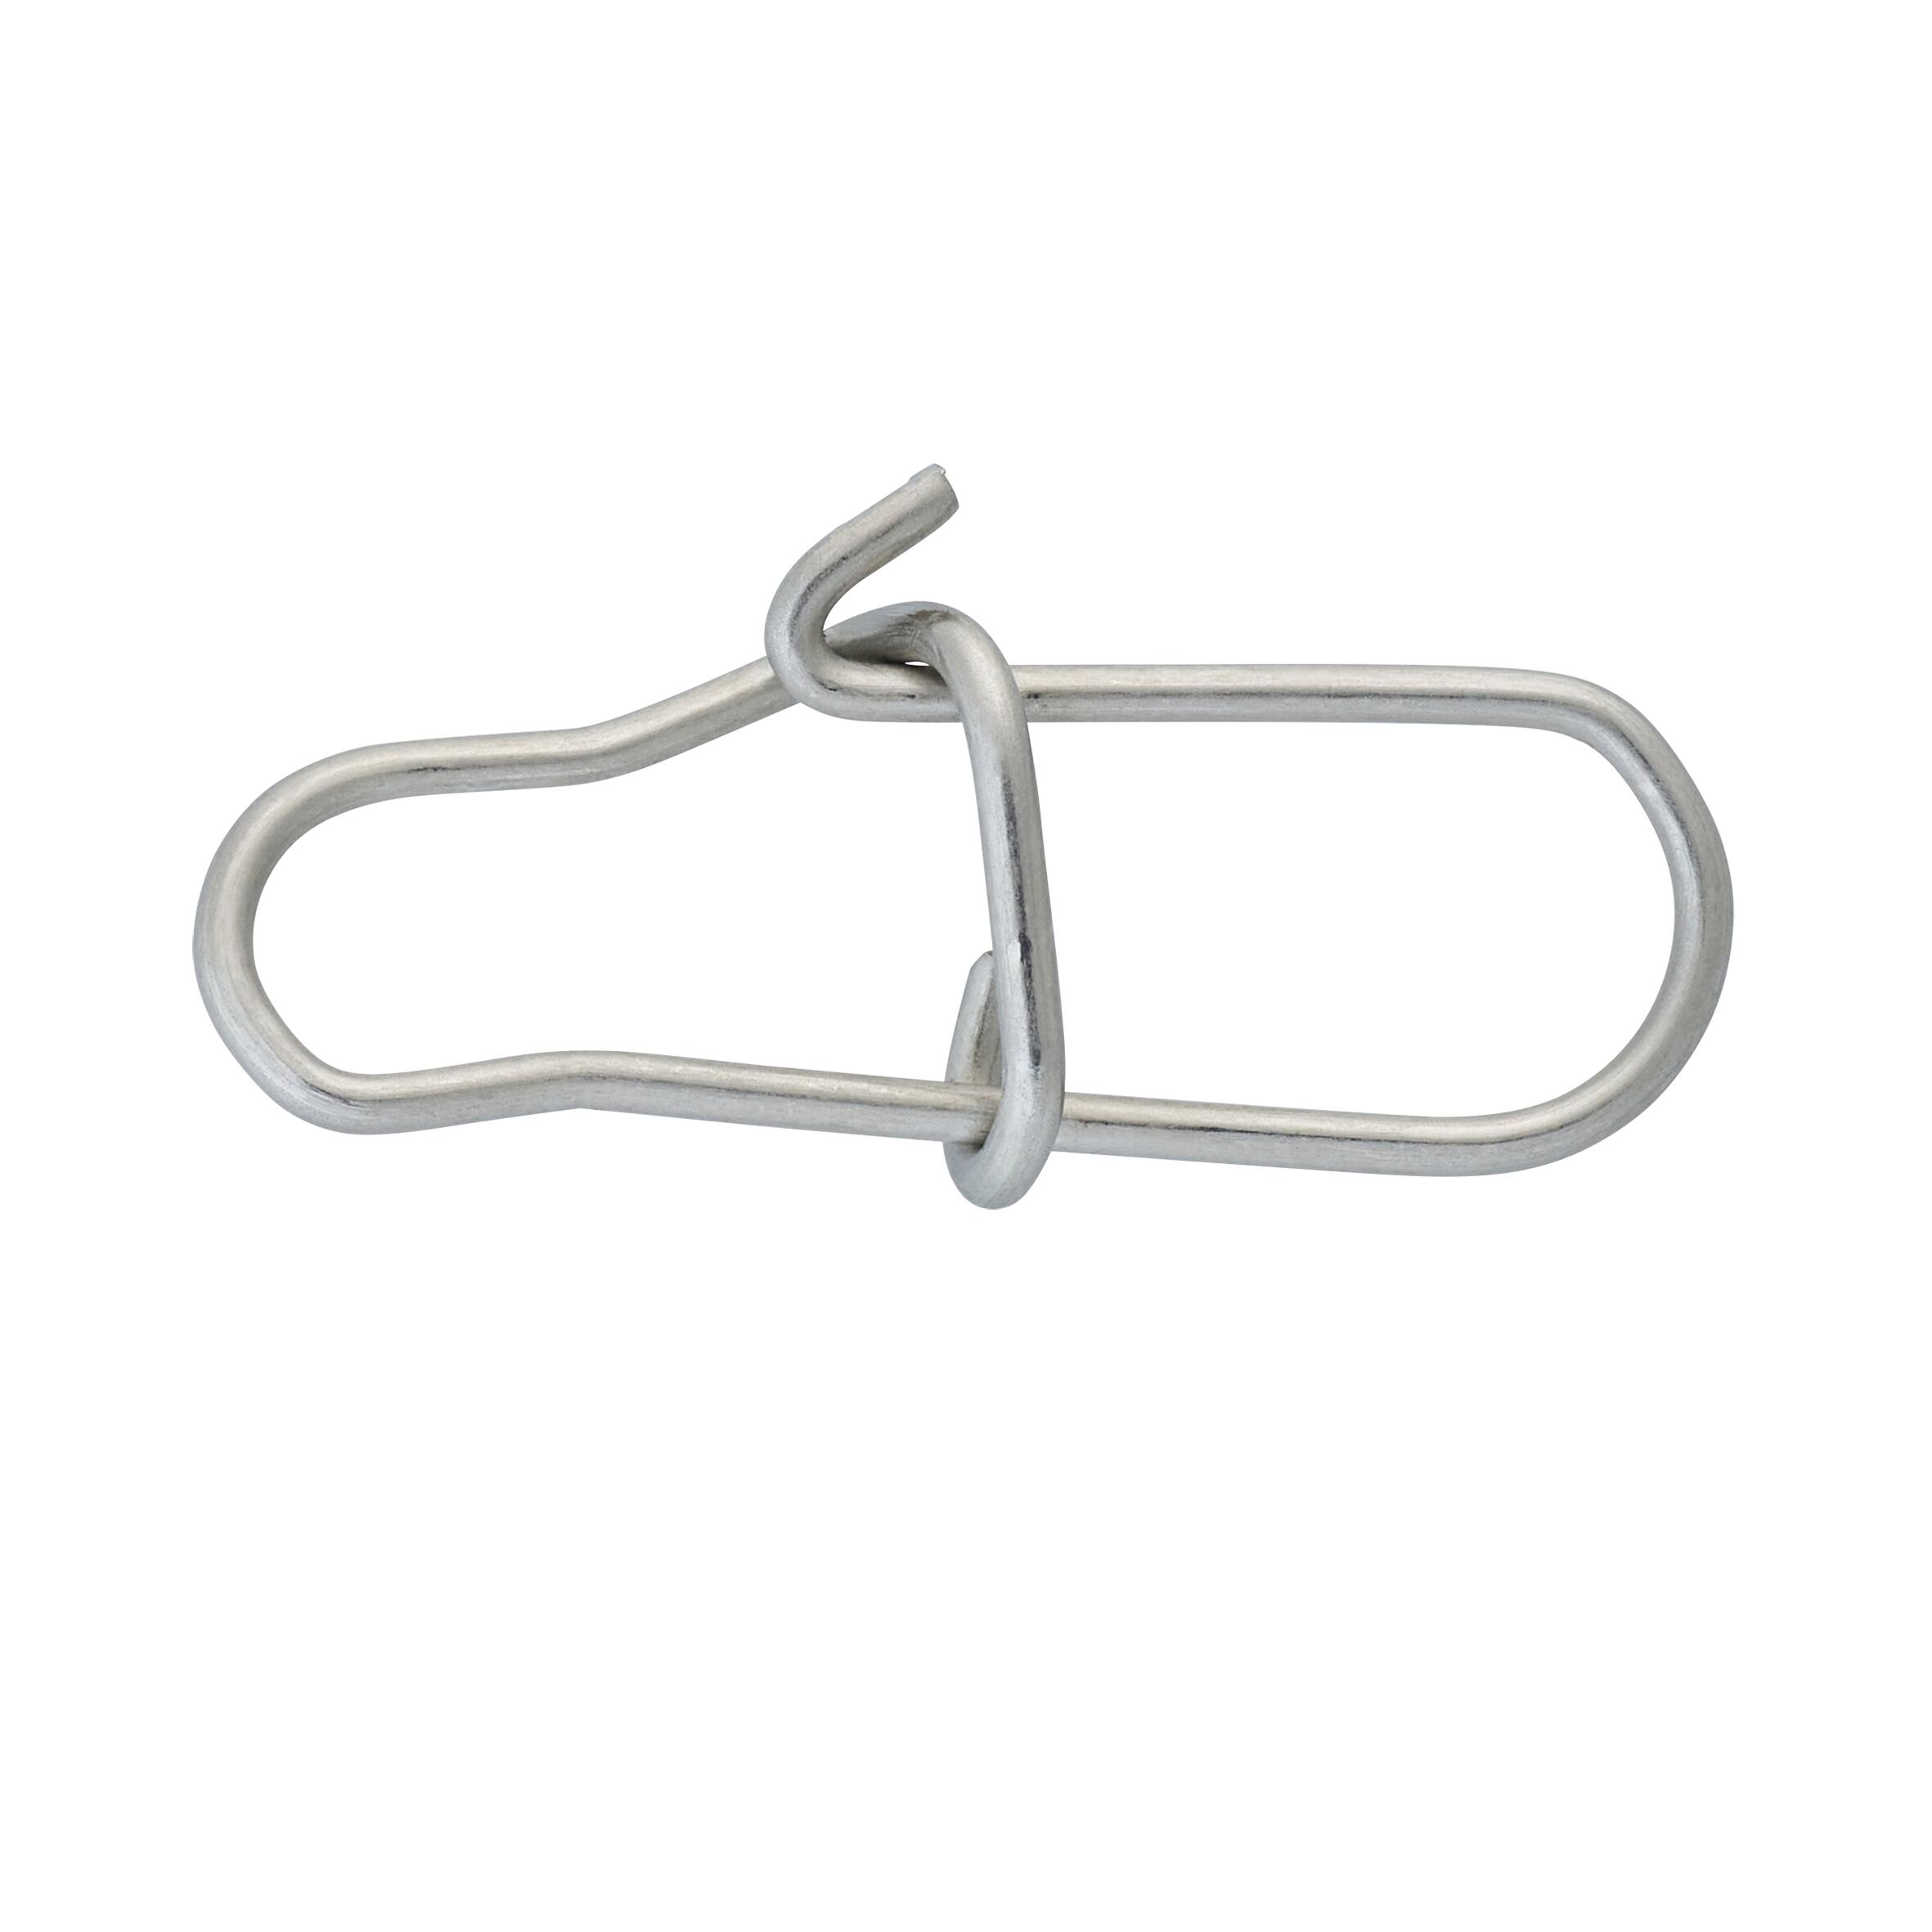 Fishing Stainless Steel Double Snap Clips x10 2/10